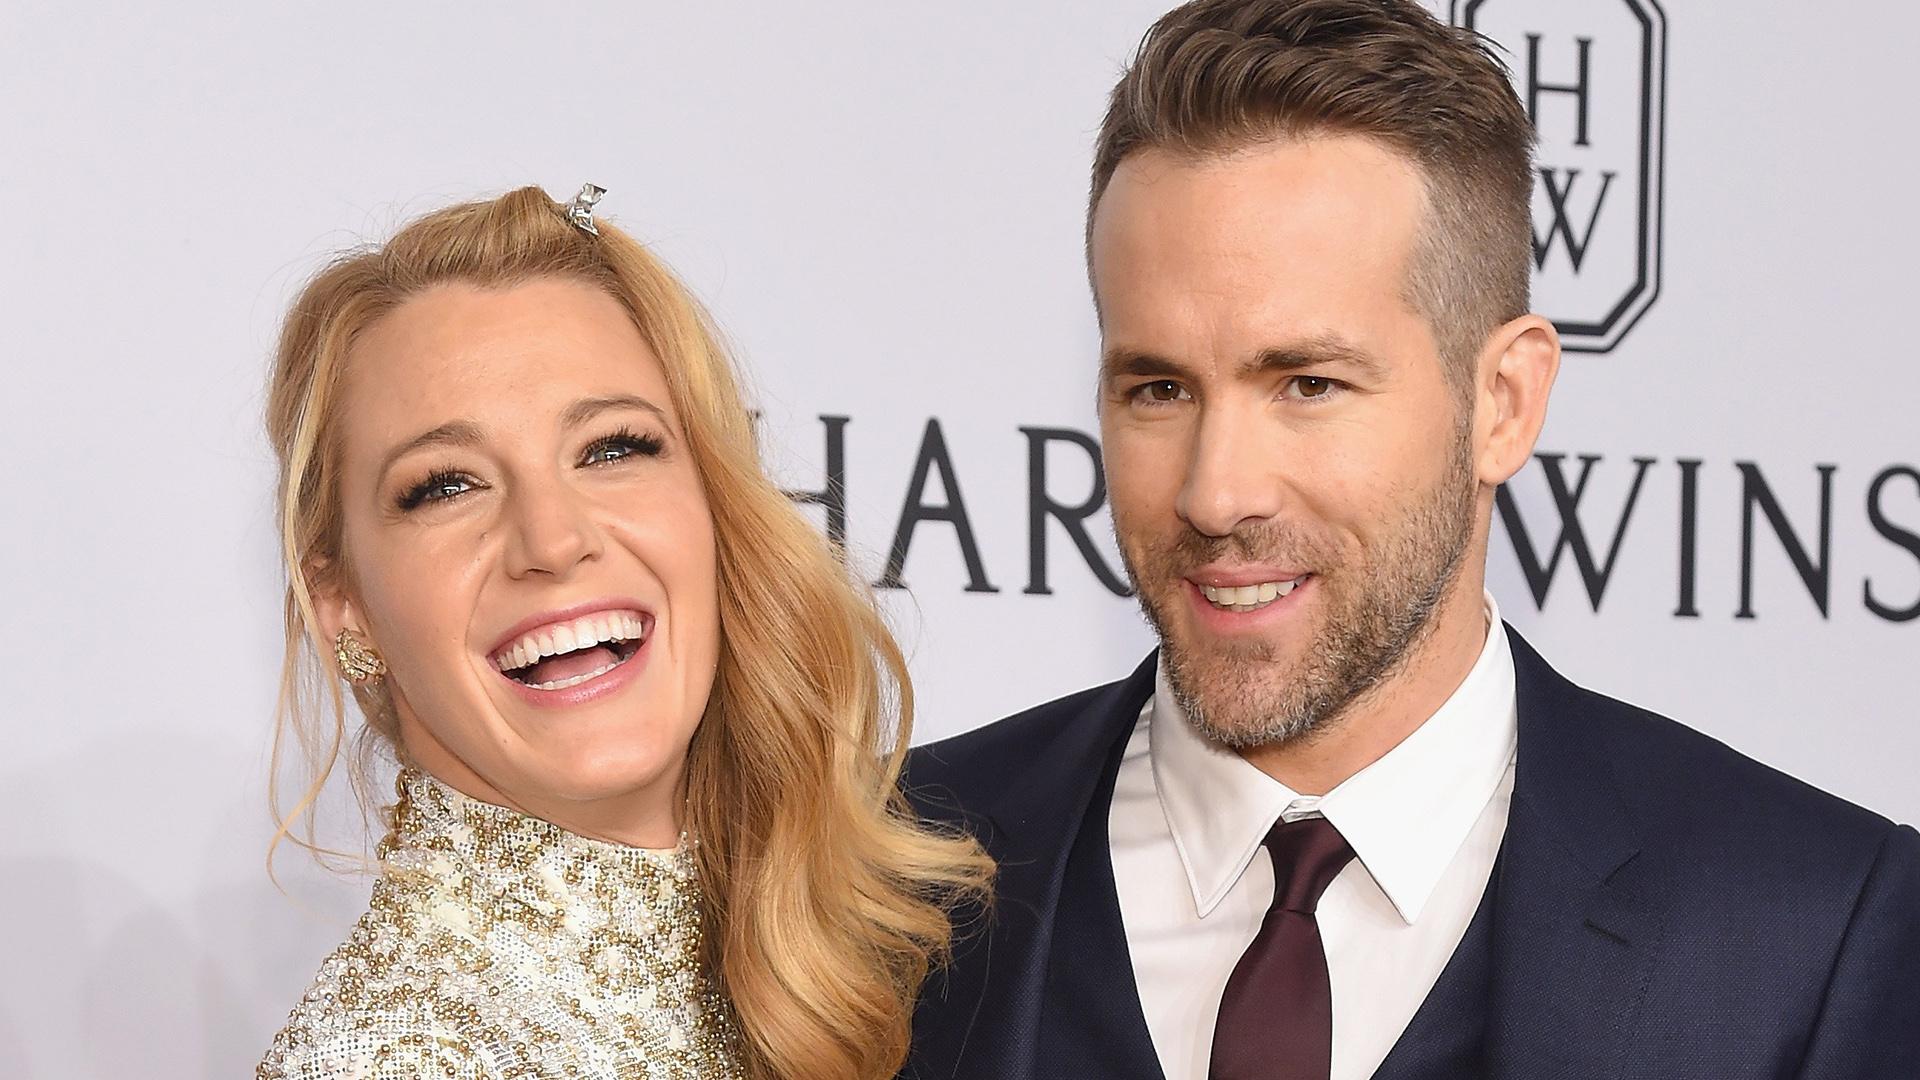 Blake Lively reveals how she knew she wanted to marry Ryan Reynolds.